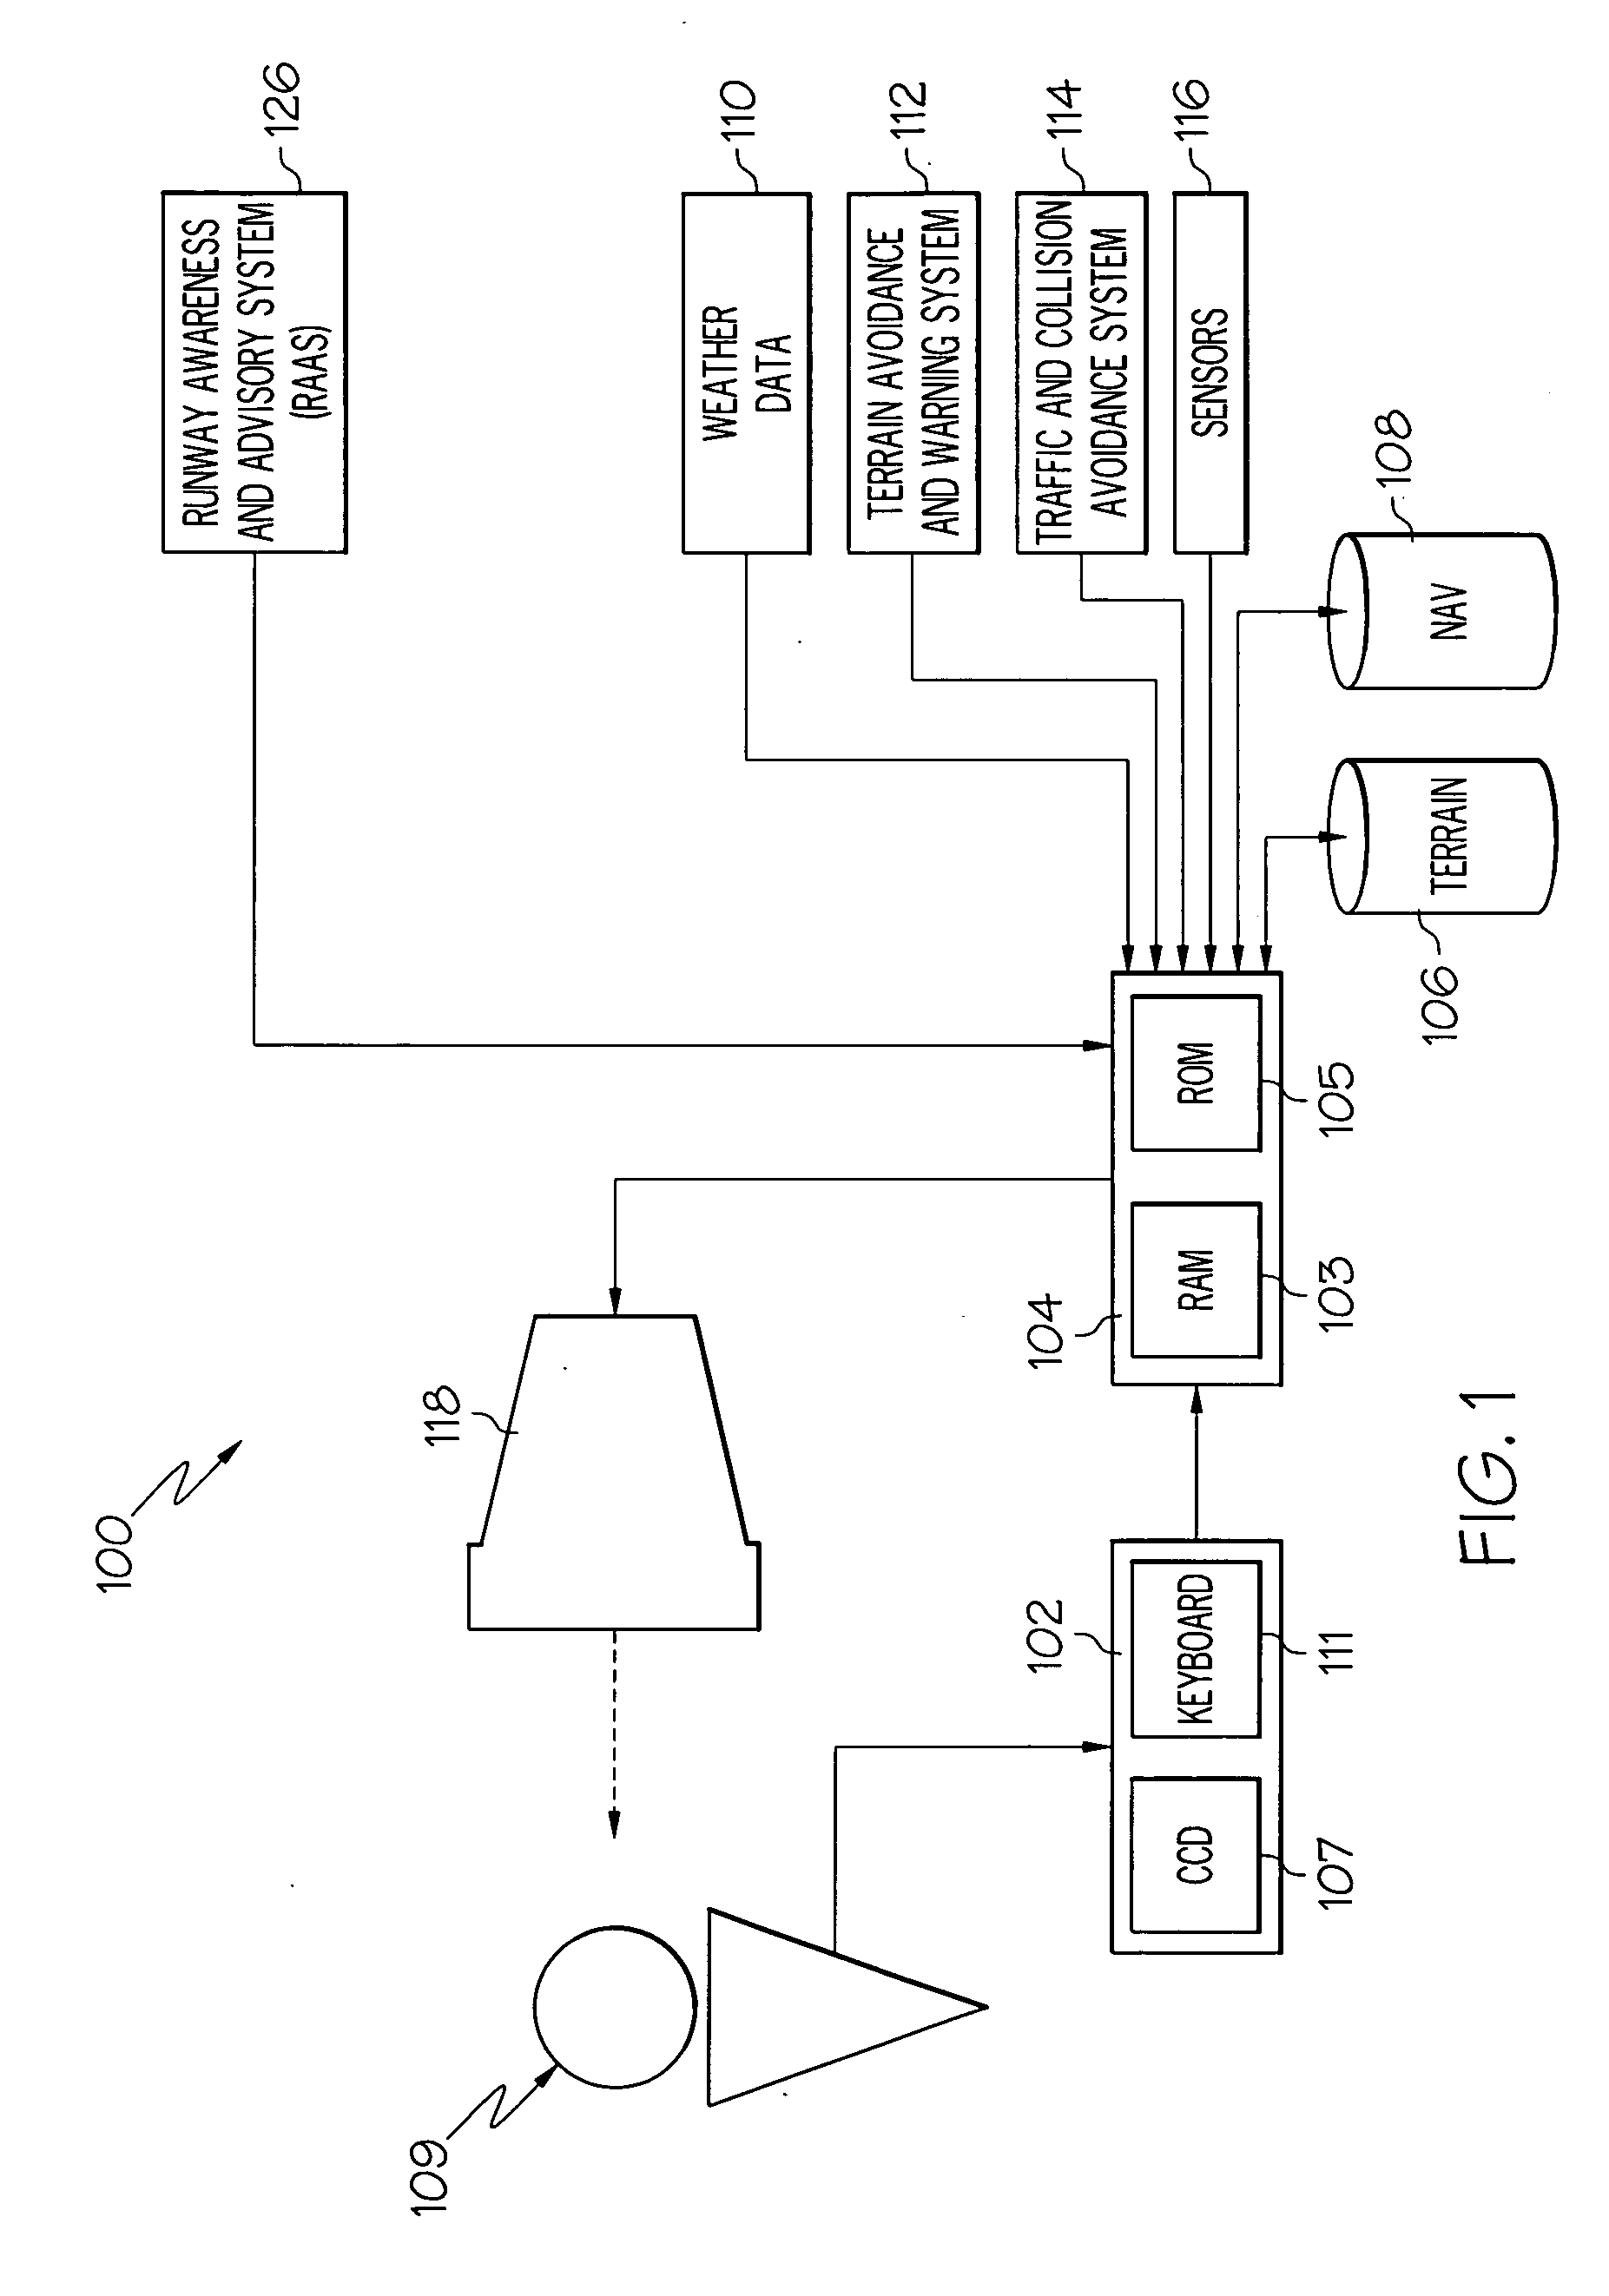 Methods and apparatus for overlaying non-georeferenced symbology on a georeferenced chart